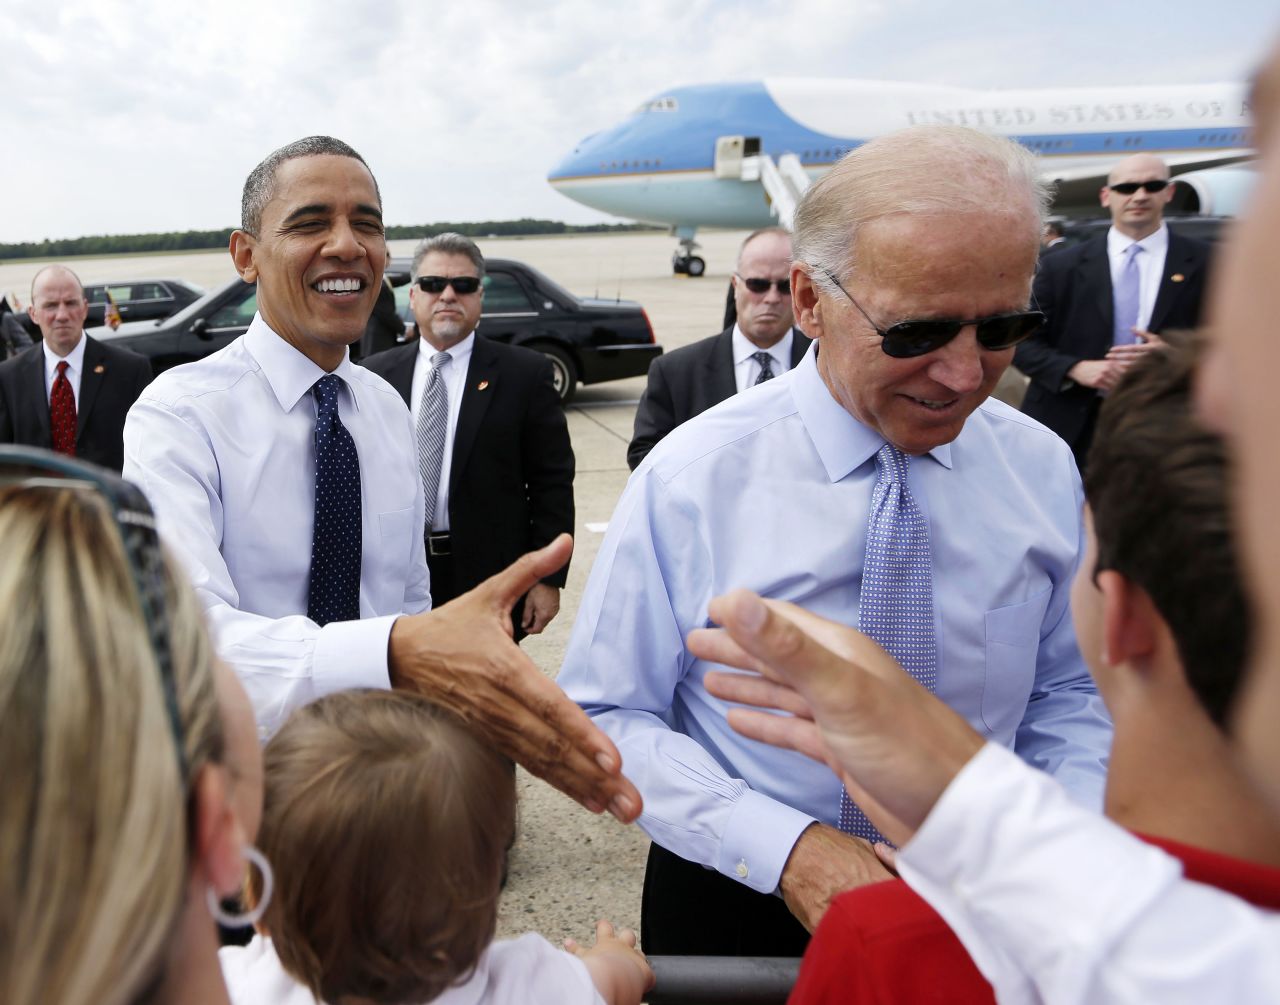 Obama and Biden greet supporters on the tarmac after arriving in Portsmouth, New Hampshire, in September 2012.